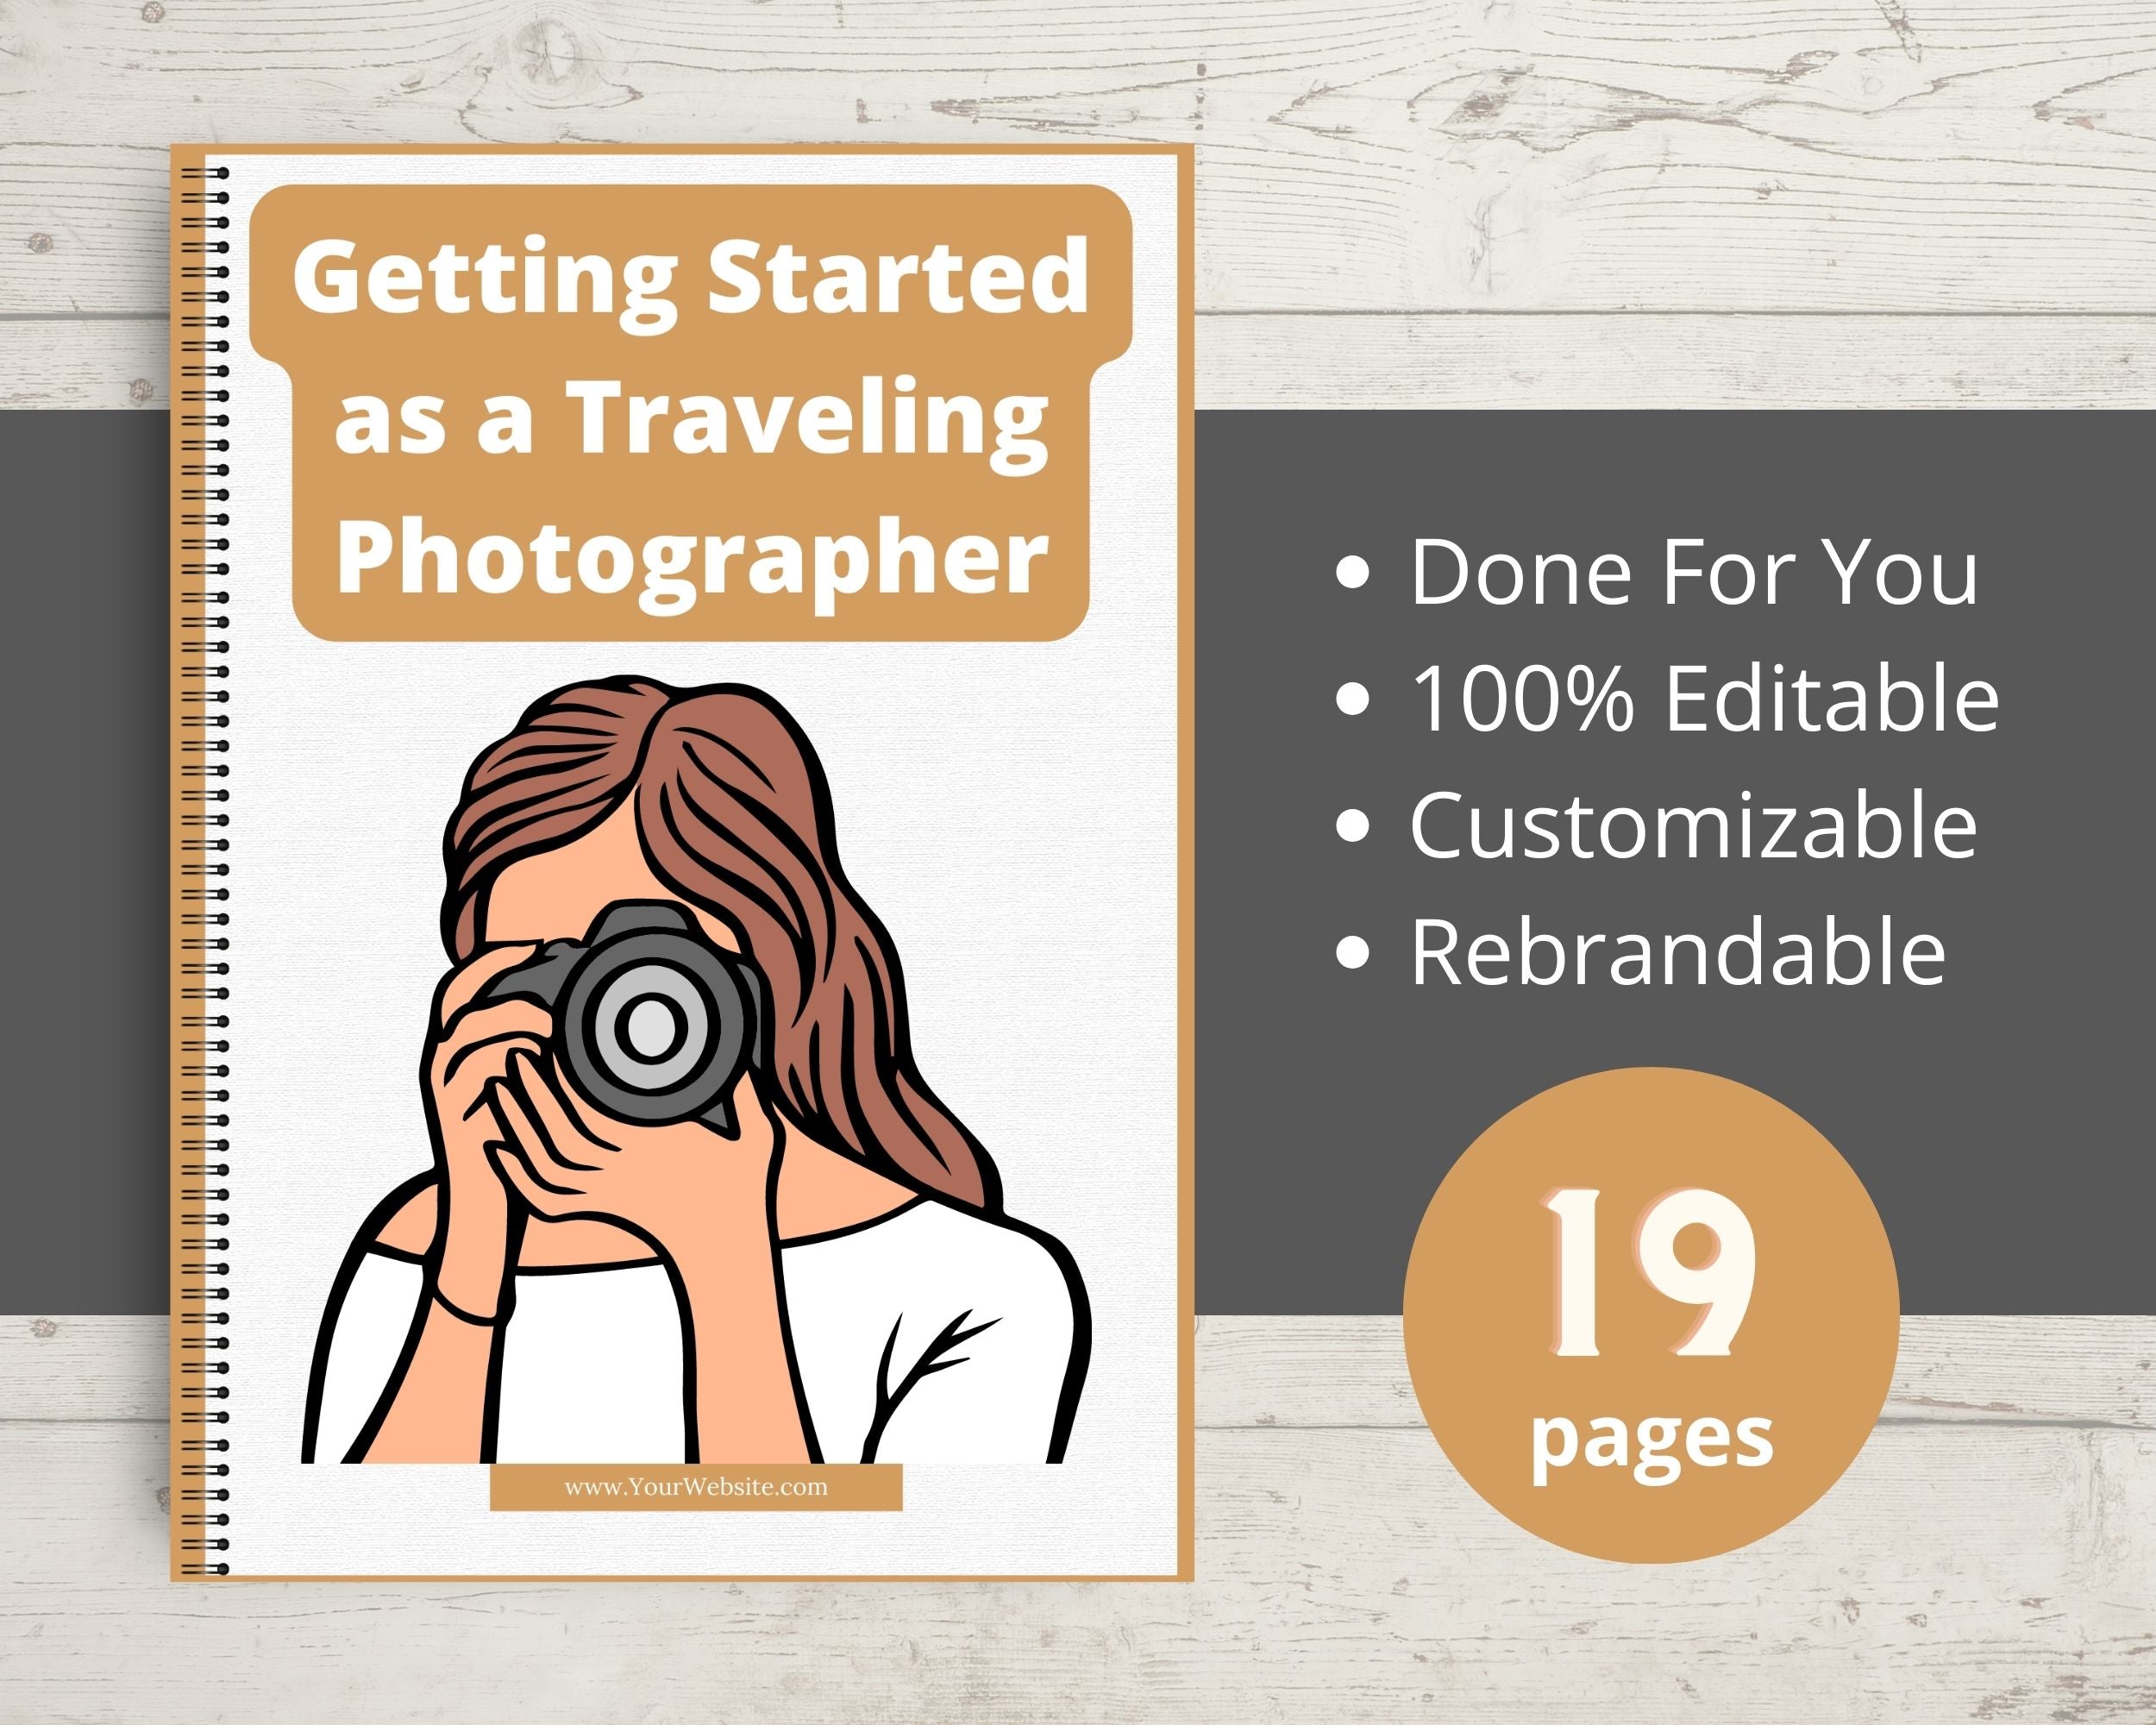 Editable Getting Started as a Traveling Photographer Ebook in Canva | Rebrandable and Resizable Canva Template